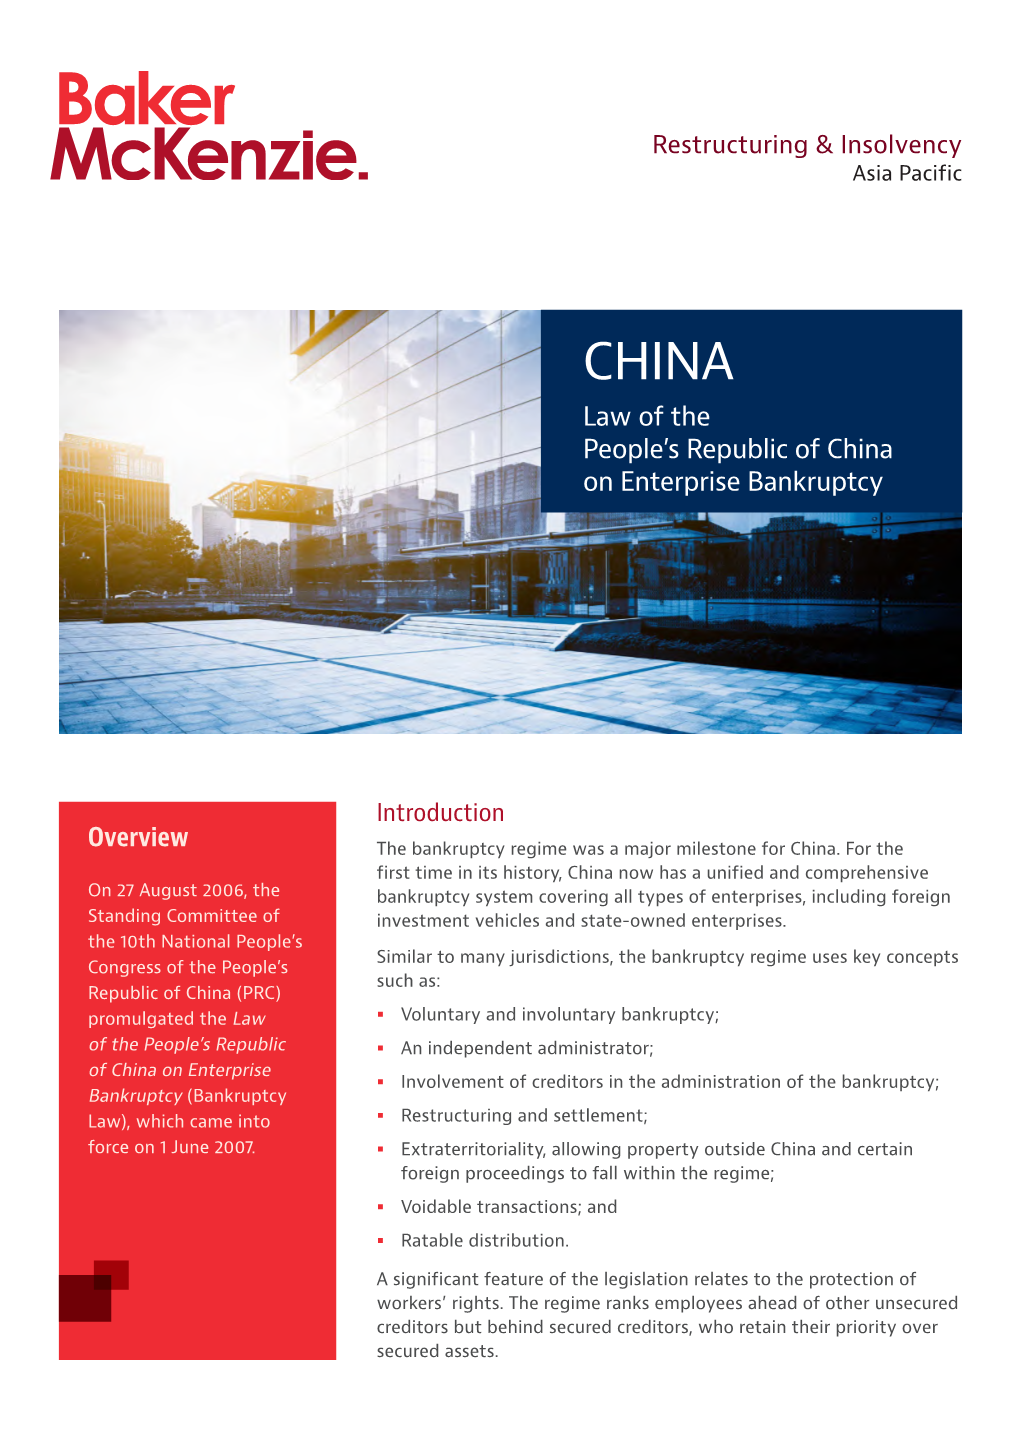 Overview Law of the People's Republic of China on Enterprise